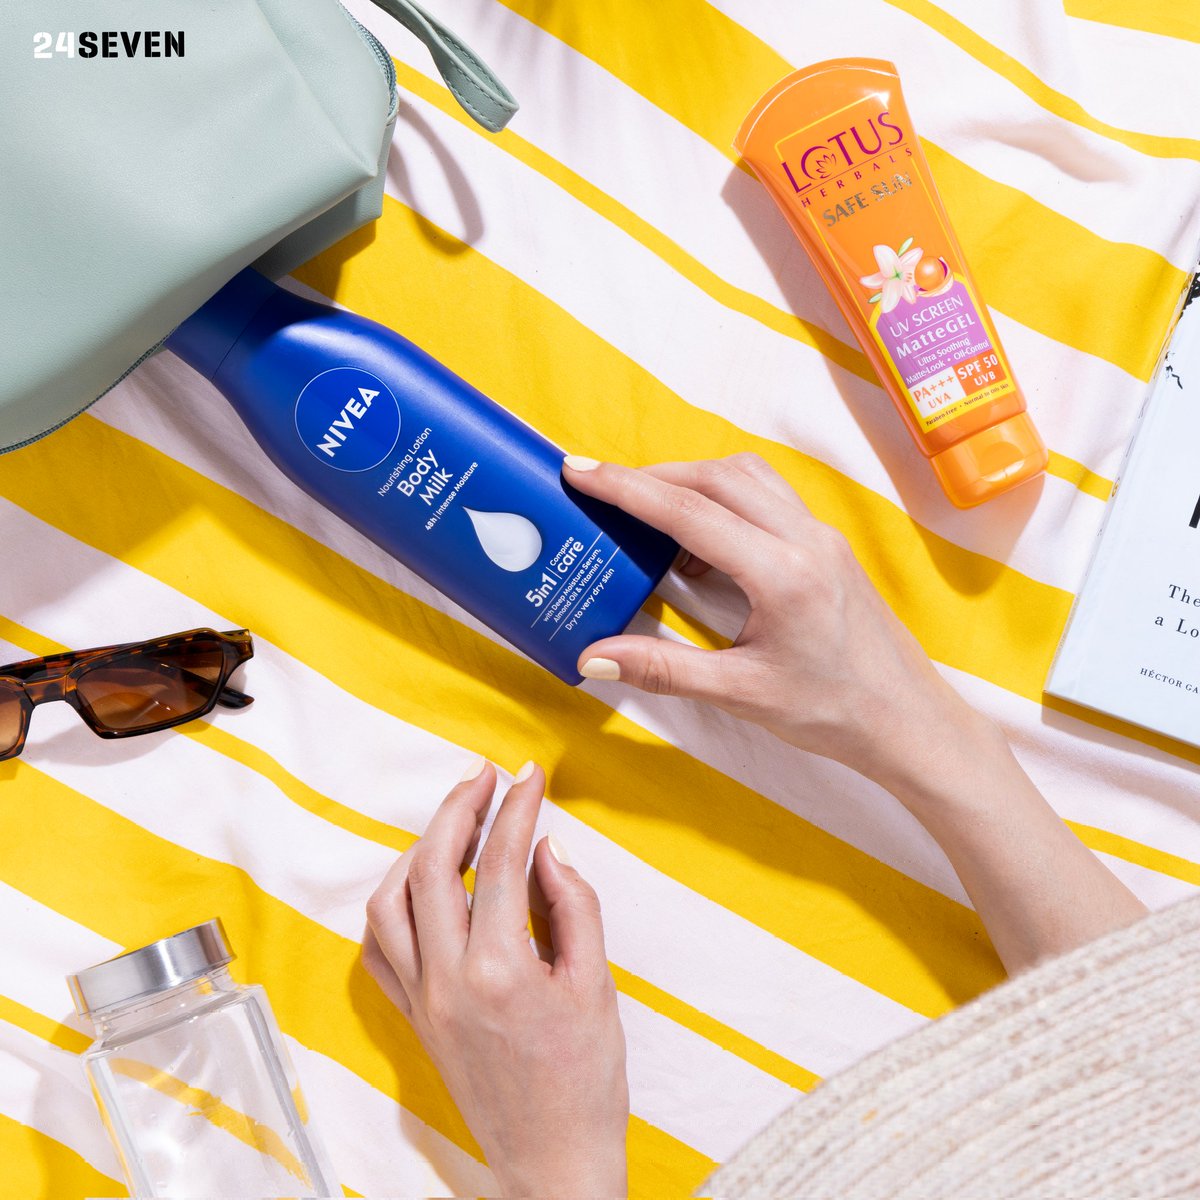 With the summer sun out, get your skin in the game with hydration and protection from 24Seven! ☀️😌

#24Seven #24Sevenin #Summers #SummerEssentials #Sunscreen #Moisturiser #BodyLotion #Skincare #SummerCare #Hydration #24SevenStore #ConvenientHai #Visit24Seven